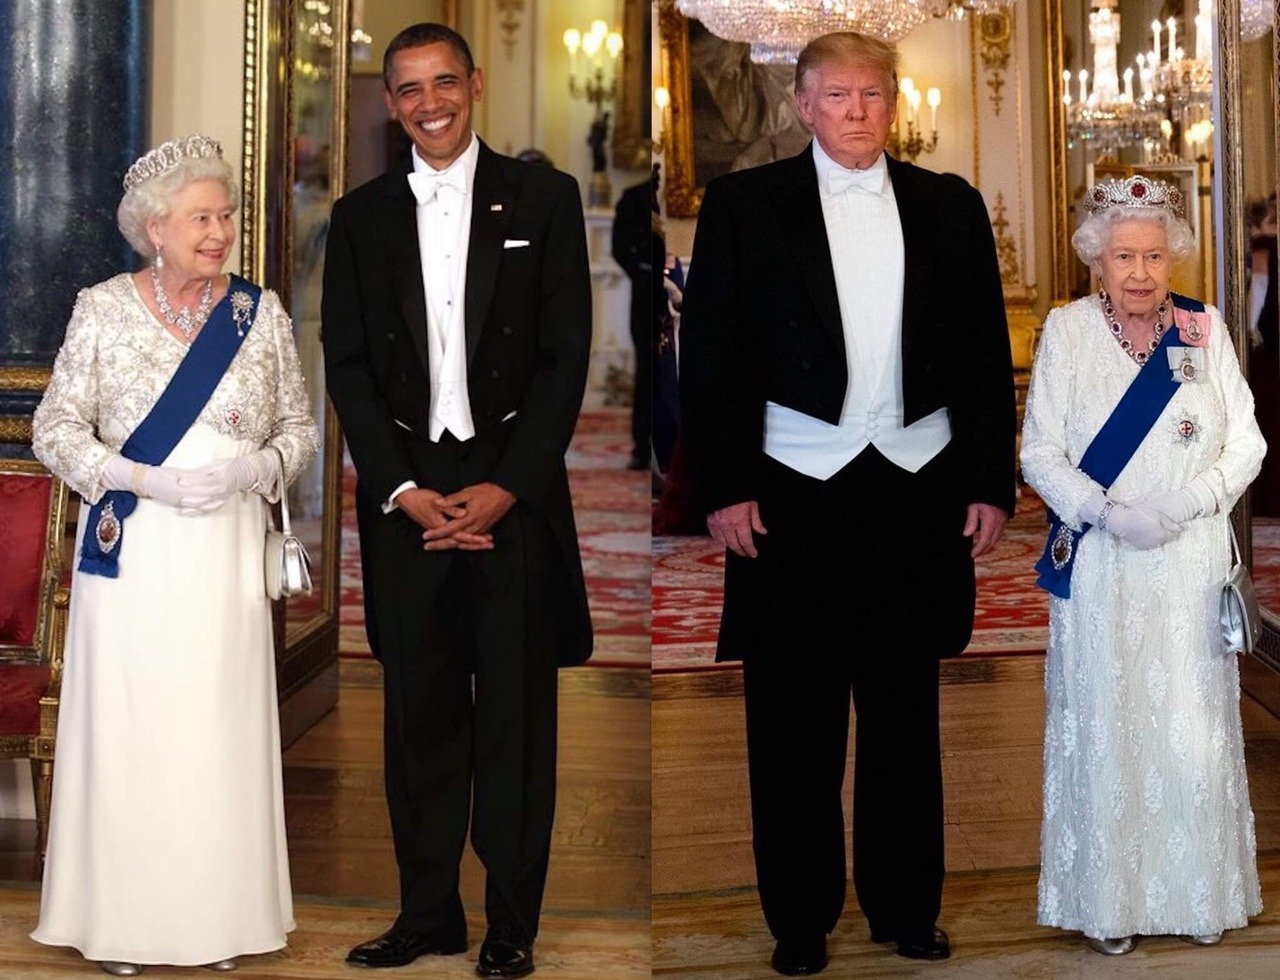 Trump's 'ill-fitting' tux mocked on Twitter after queen's banquet